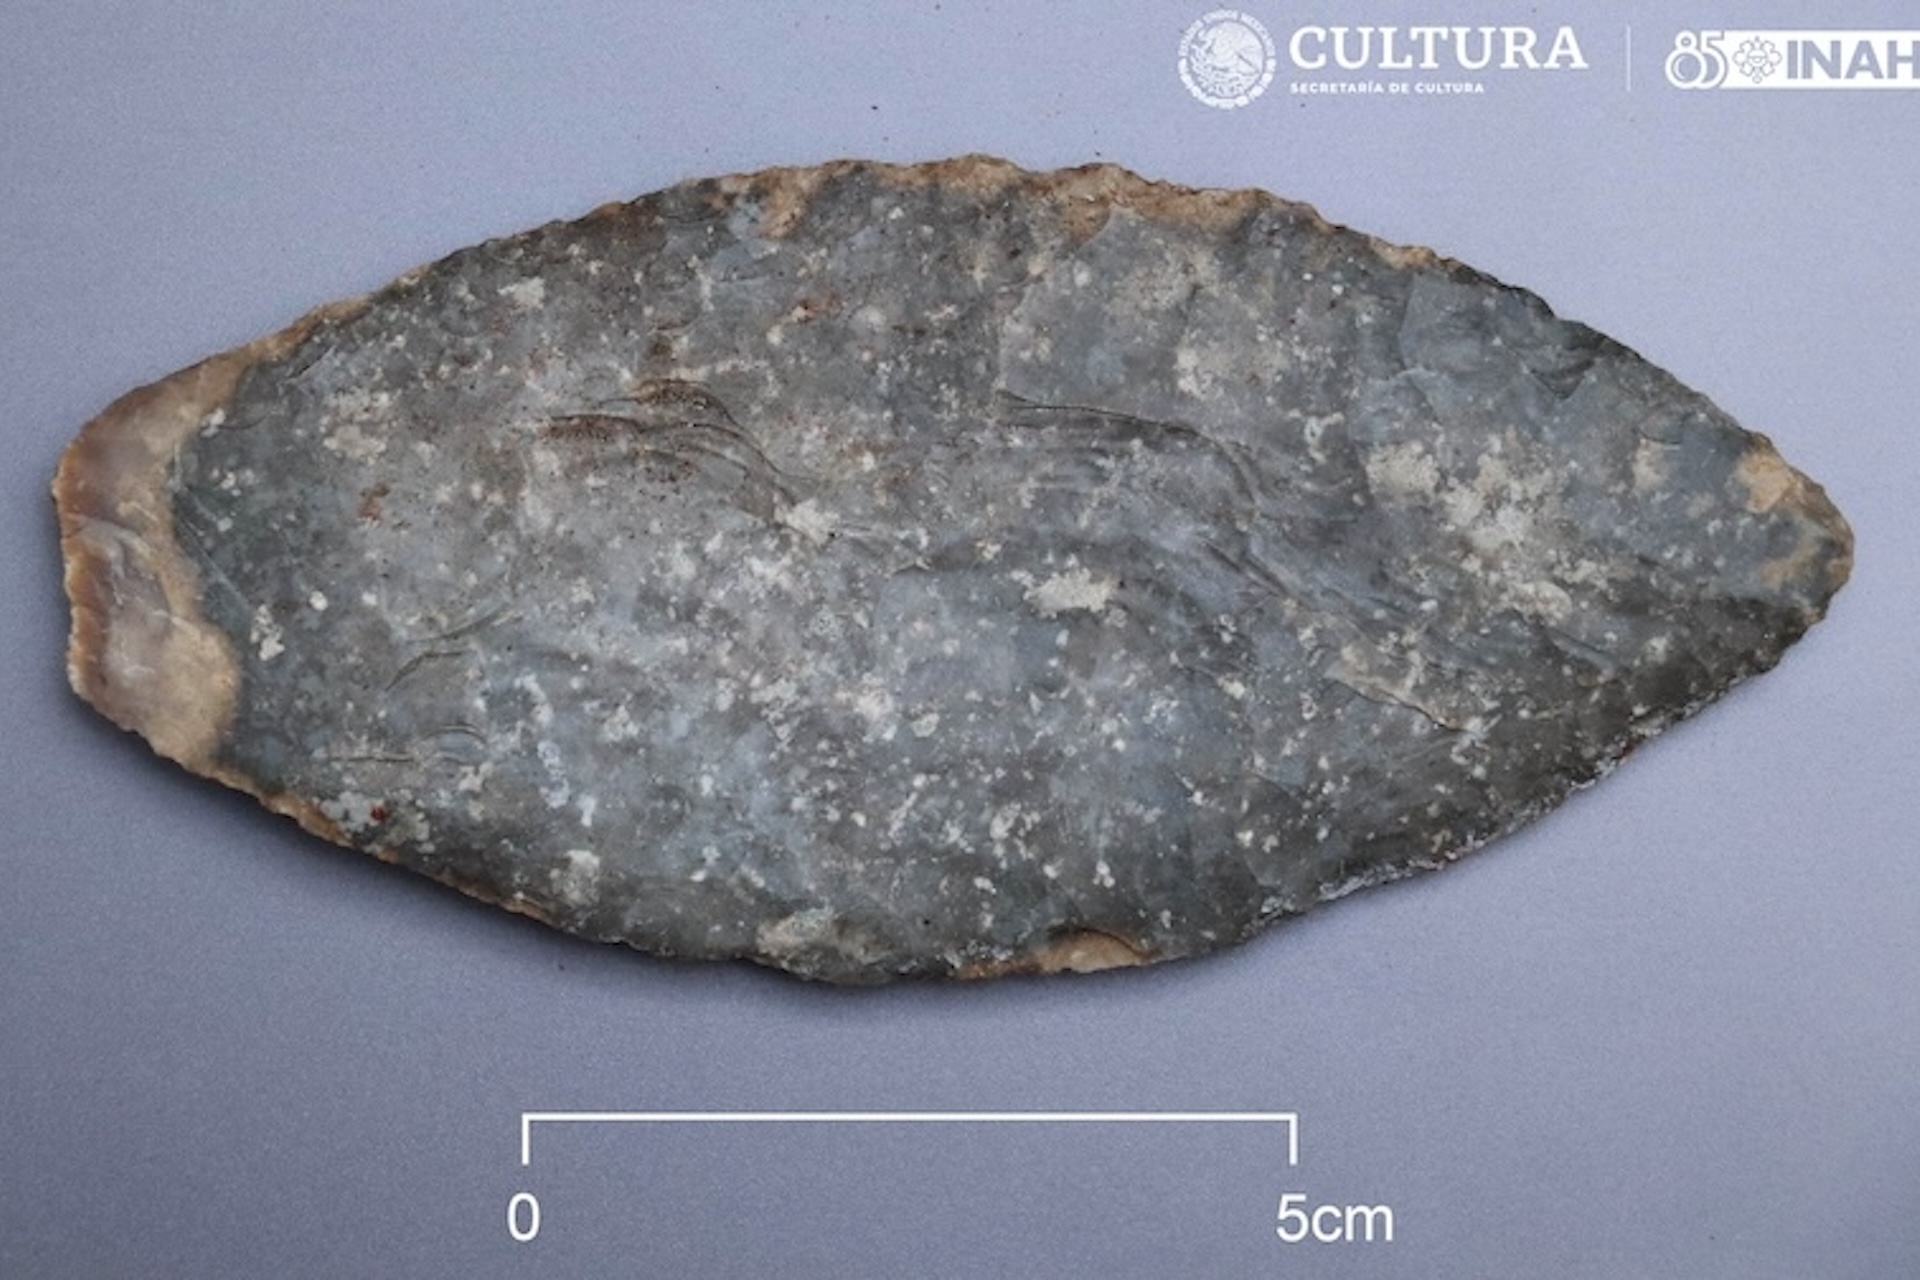 A flint knife or point in the shape of a diamond with two pointed edges and two rounded edges